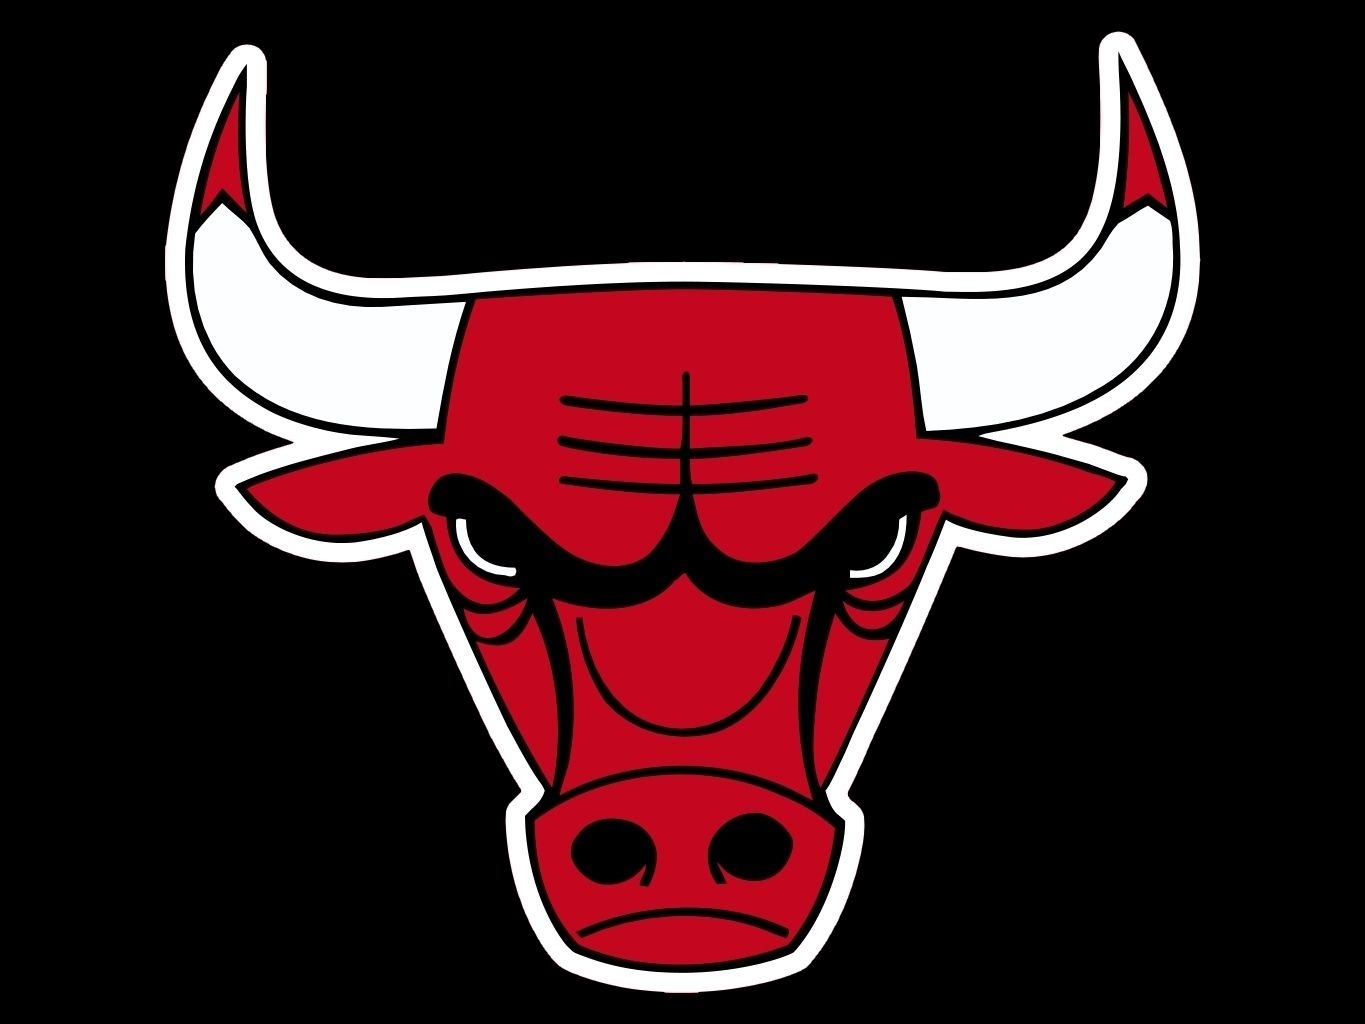 10 Most Popular Cool Chicago Bulls Logos FULL HD 1080p For PC Background